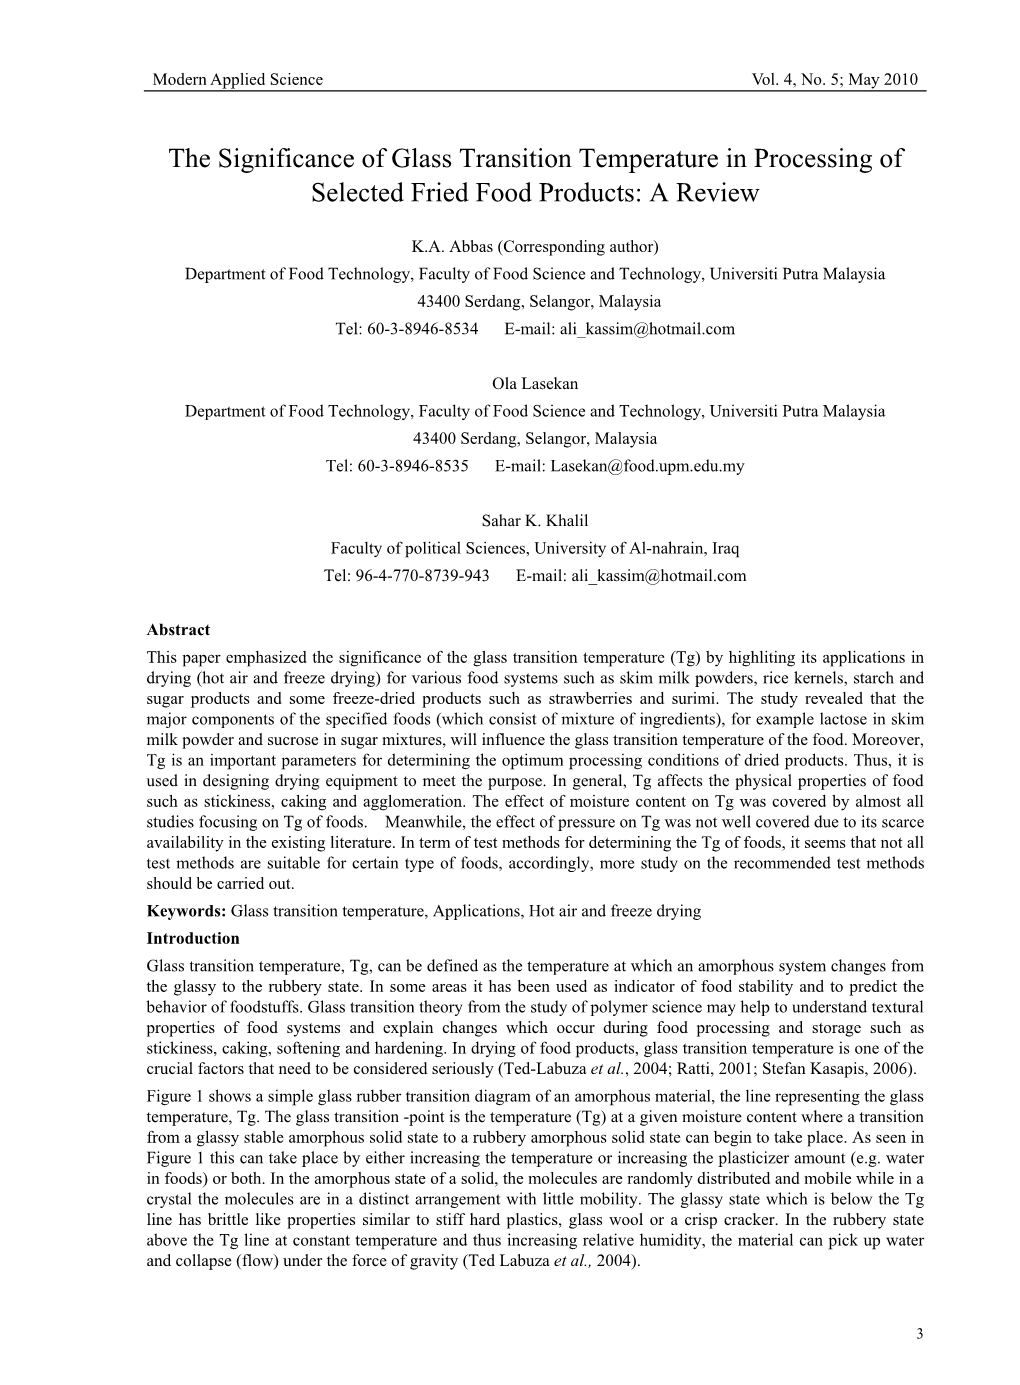 The Significance of Glass Transition Temperature in Processing of Selected Fried Food Products: a Review